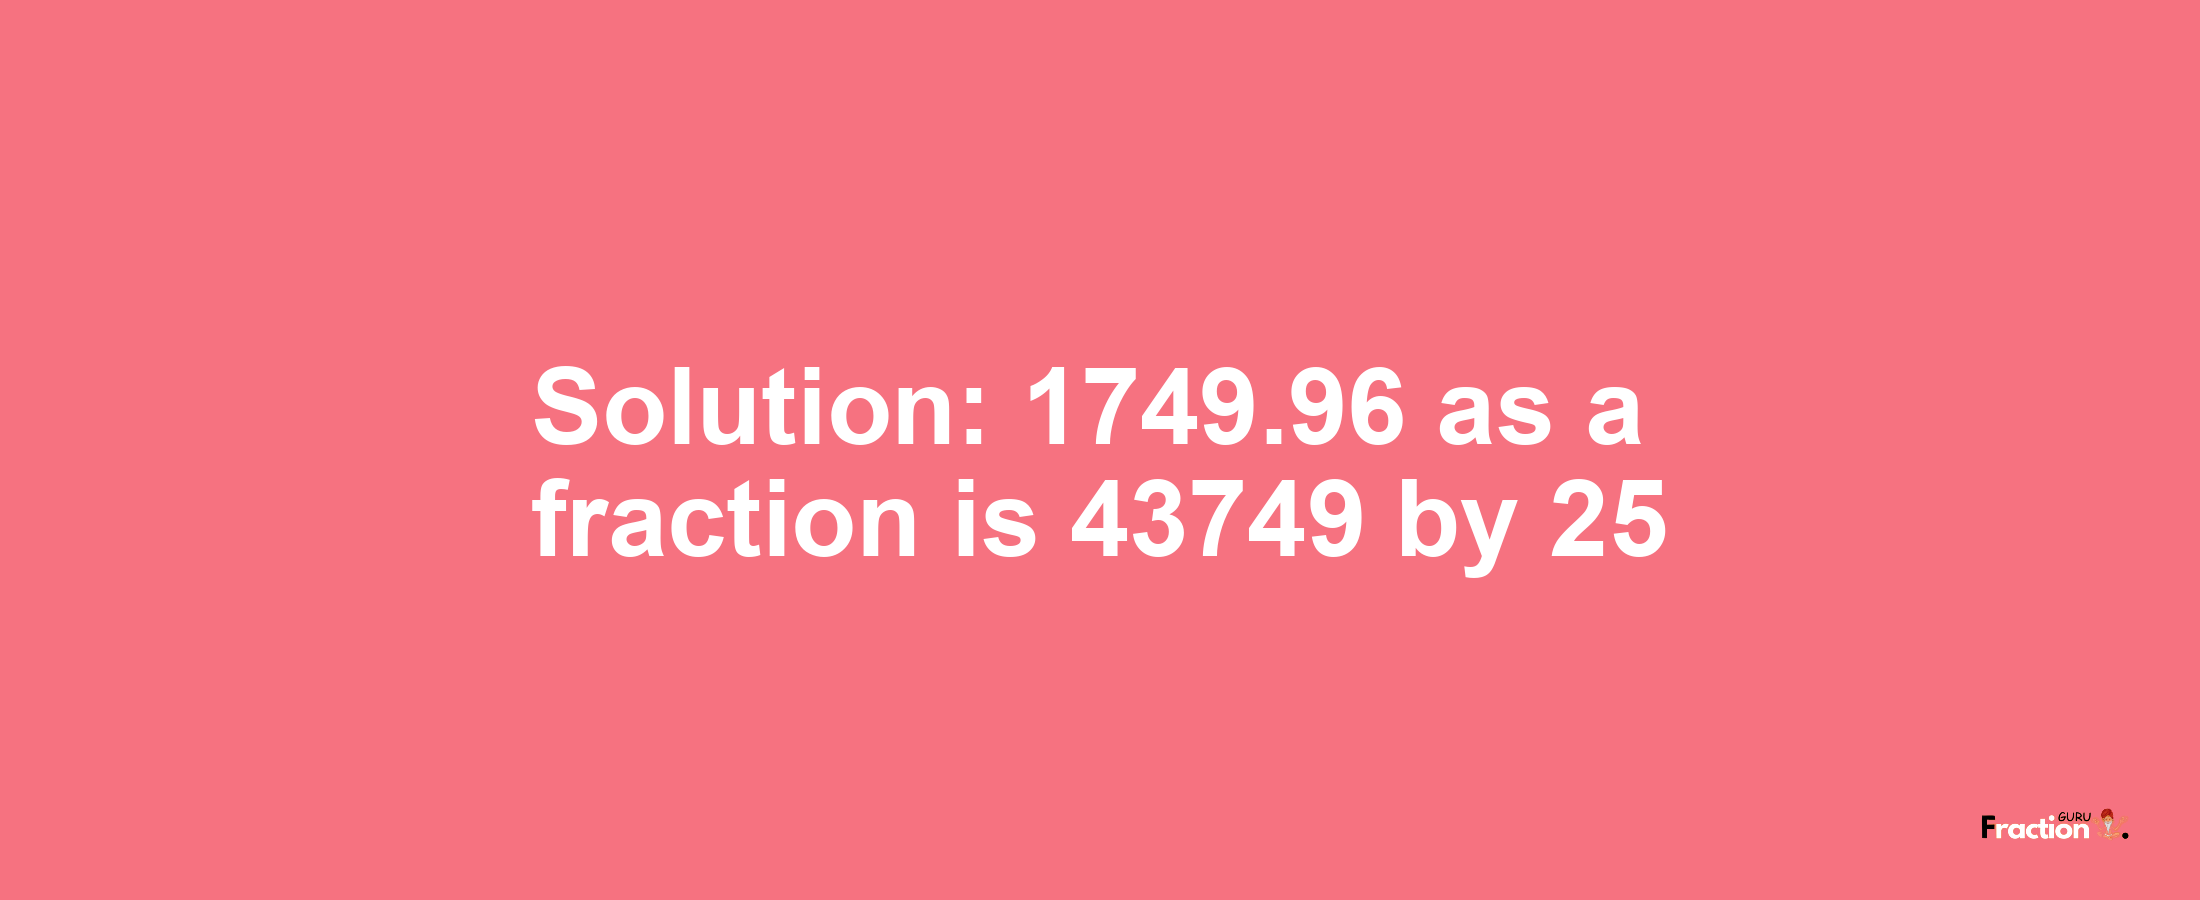 Solution:1749.96 as a fraction is 43749/25